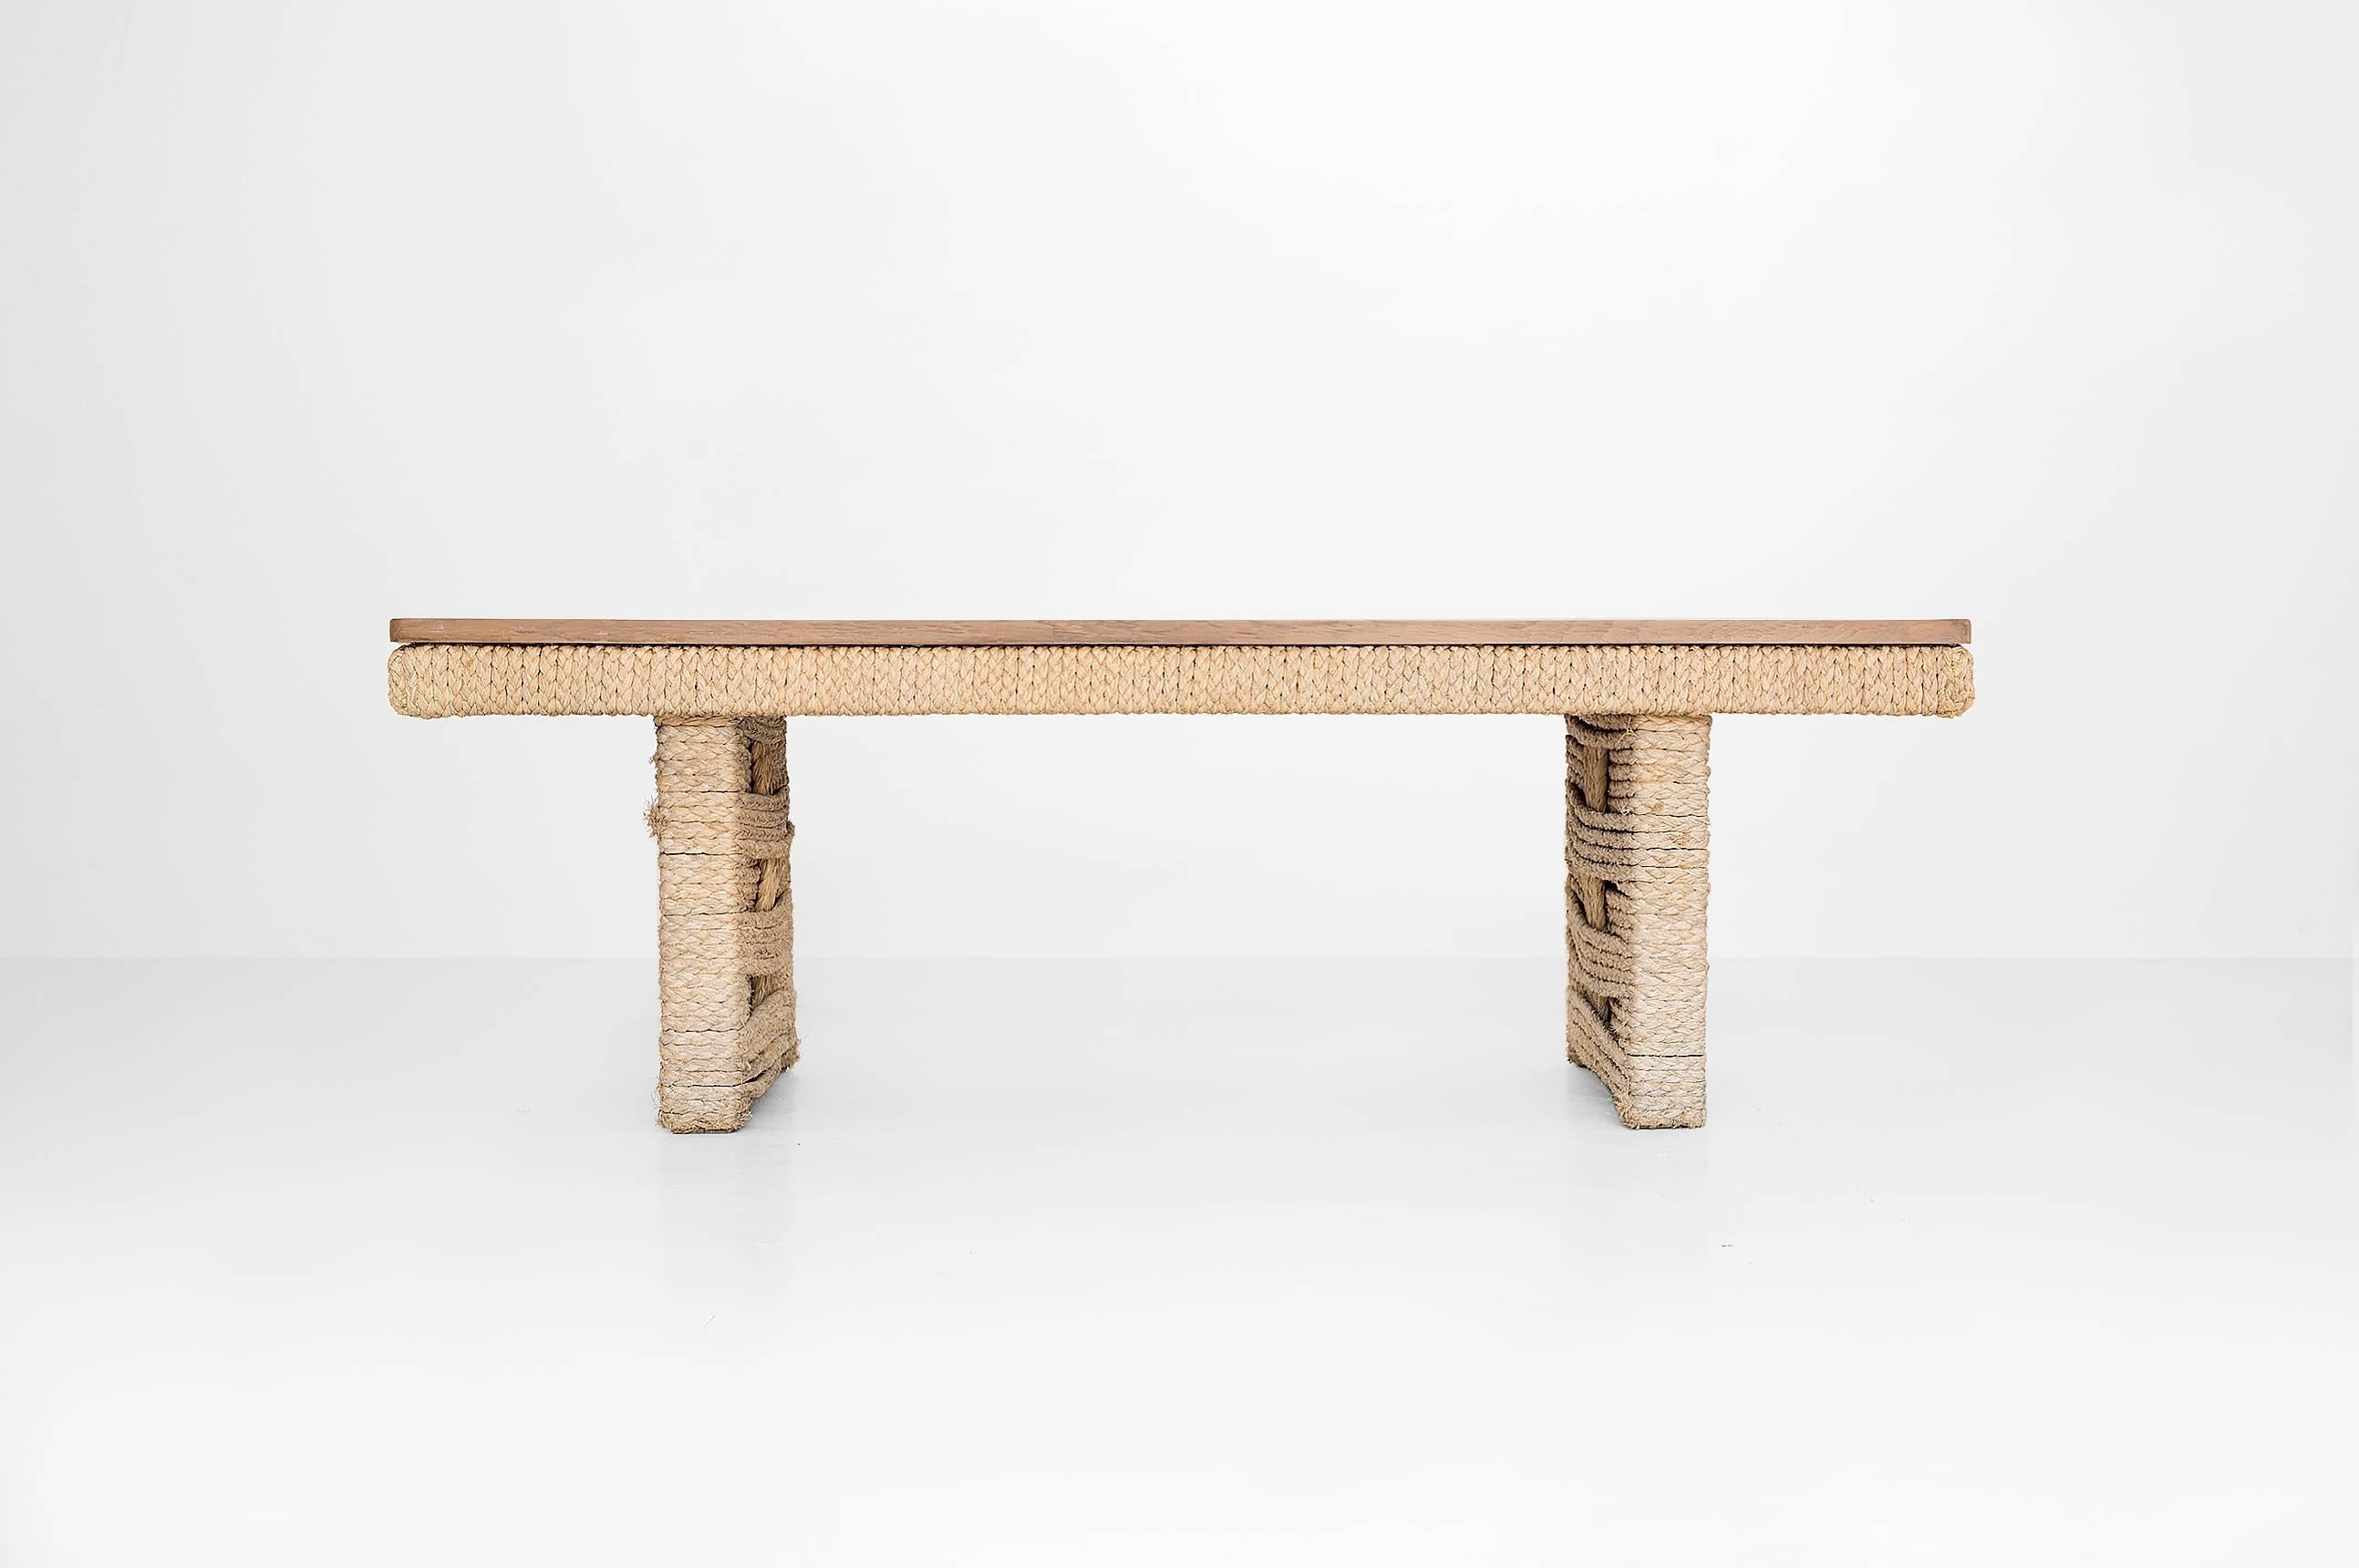 Adrian and Frida Audoux-Minet

Coffee table
Manufactured by Audoux-Minet, 
France, 1940
Rope, oak plywood

Measurements
130 cm x 46,5 cm x 45h cm
51.2 in x 18.3 in x 17.7h in

Condition
Perfect condition.